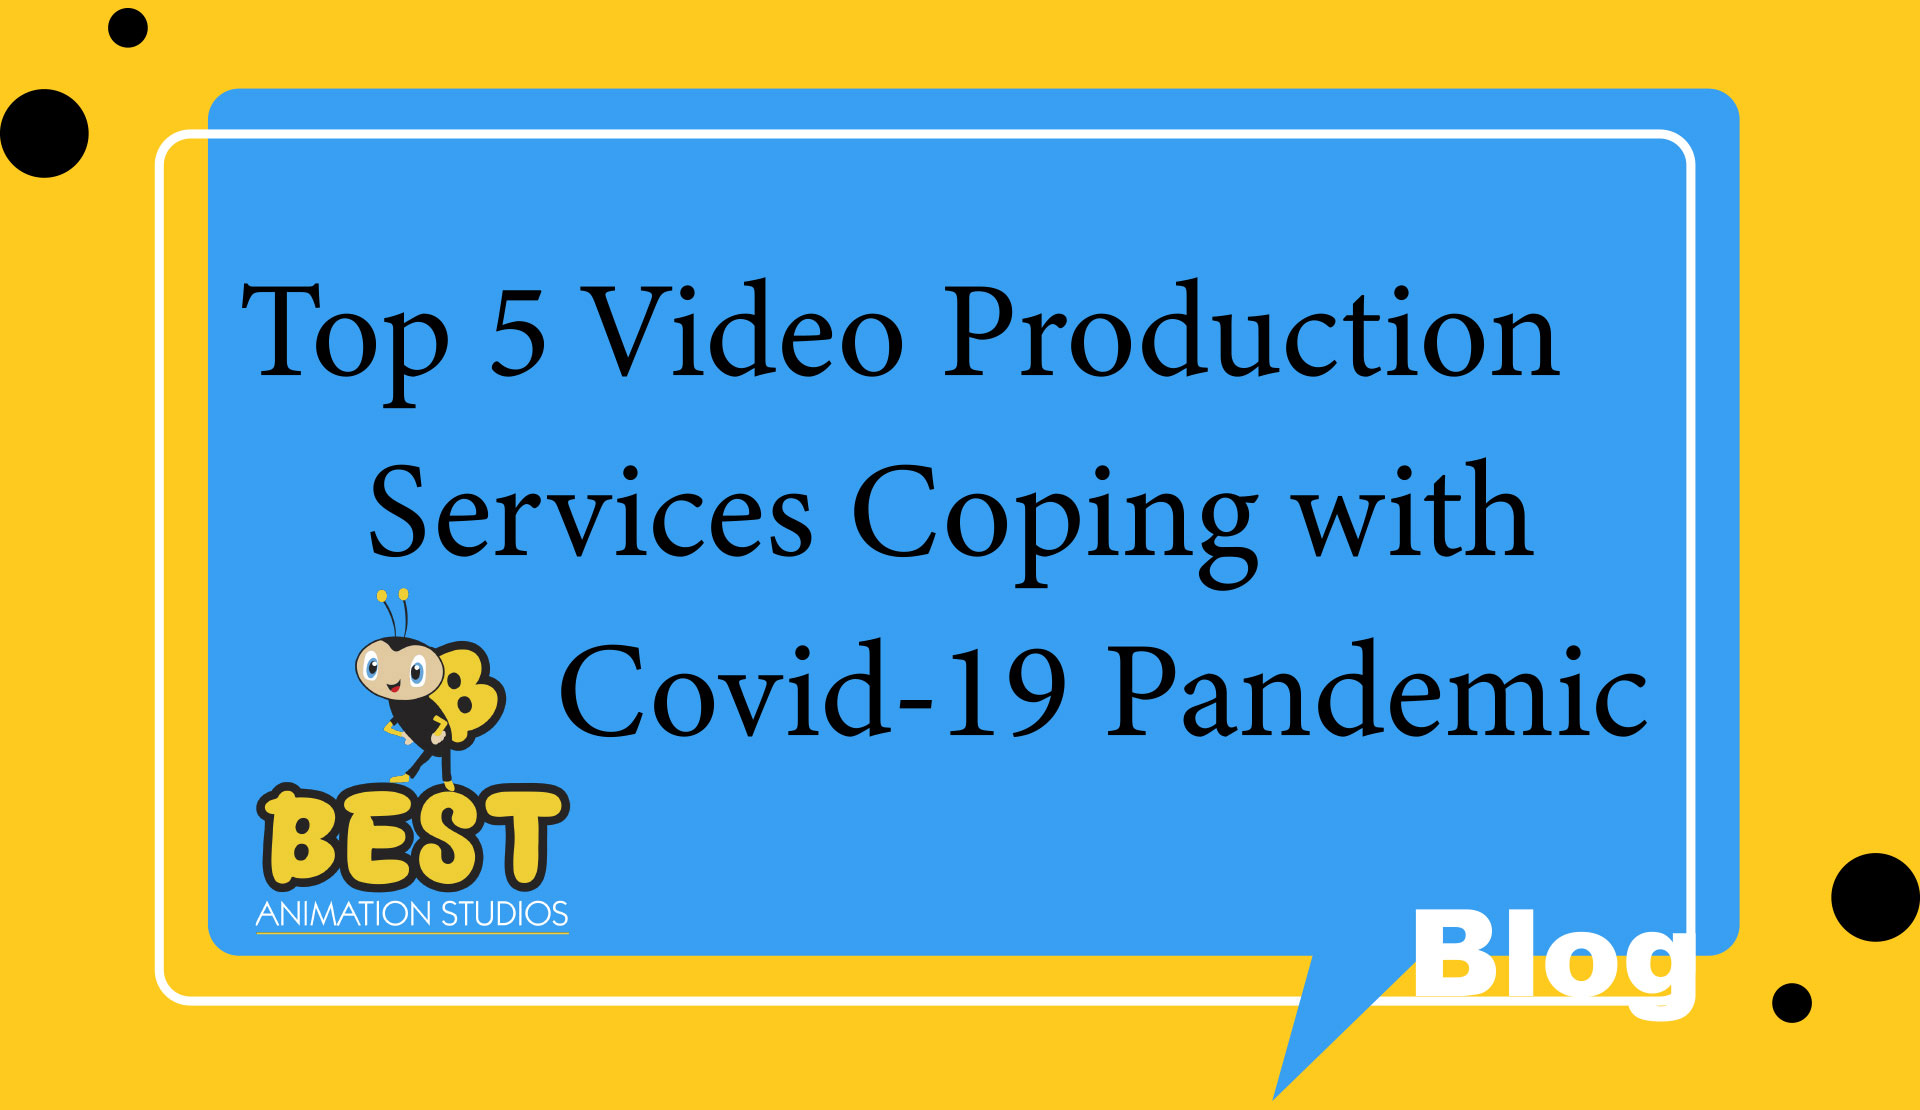 Top 5 Video Production Services Coping with Covid-19 Pandemic